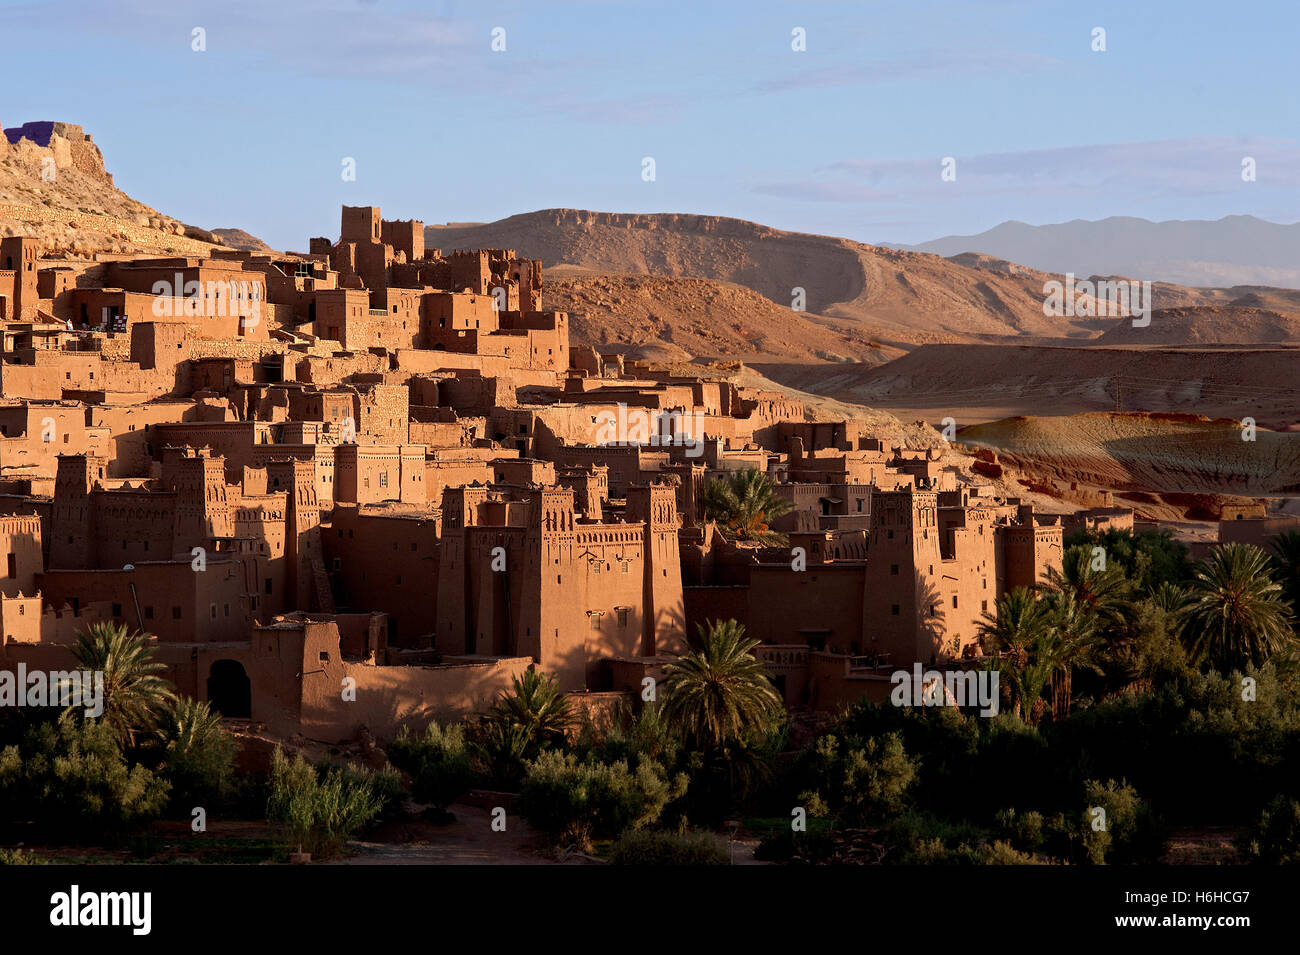 Ait Benhaddou, Morocco. The fortified town or ksar, a world heritage site, lit up at sunrise in Morocco's arid Atlas Mountains. Stock Photo